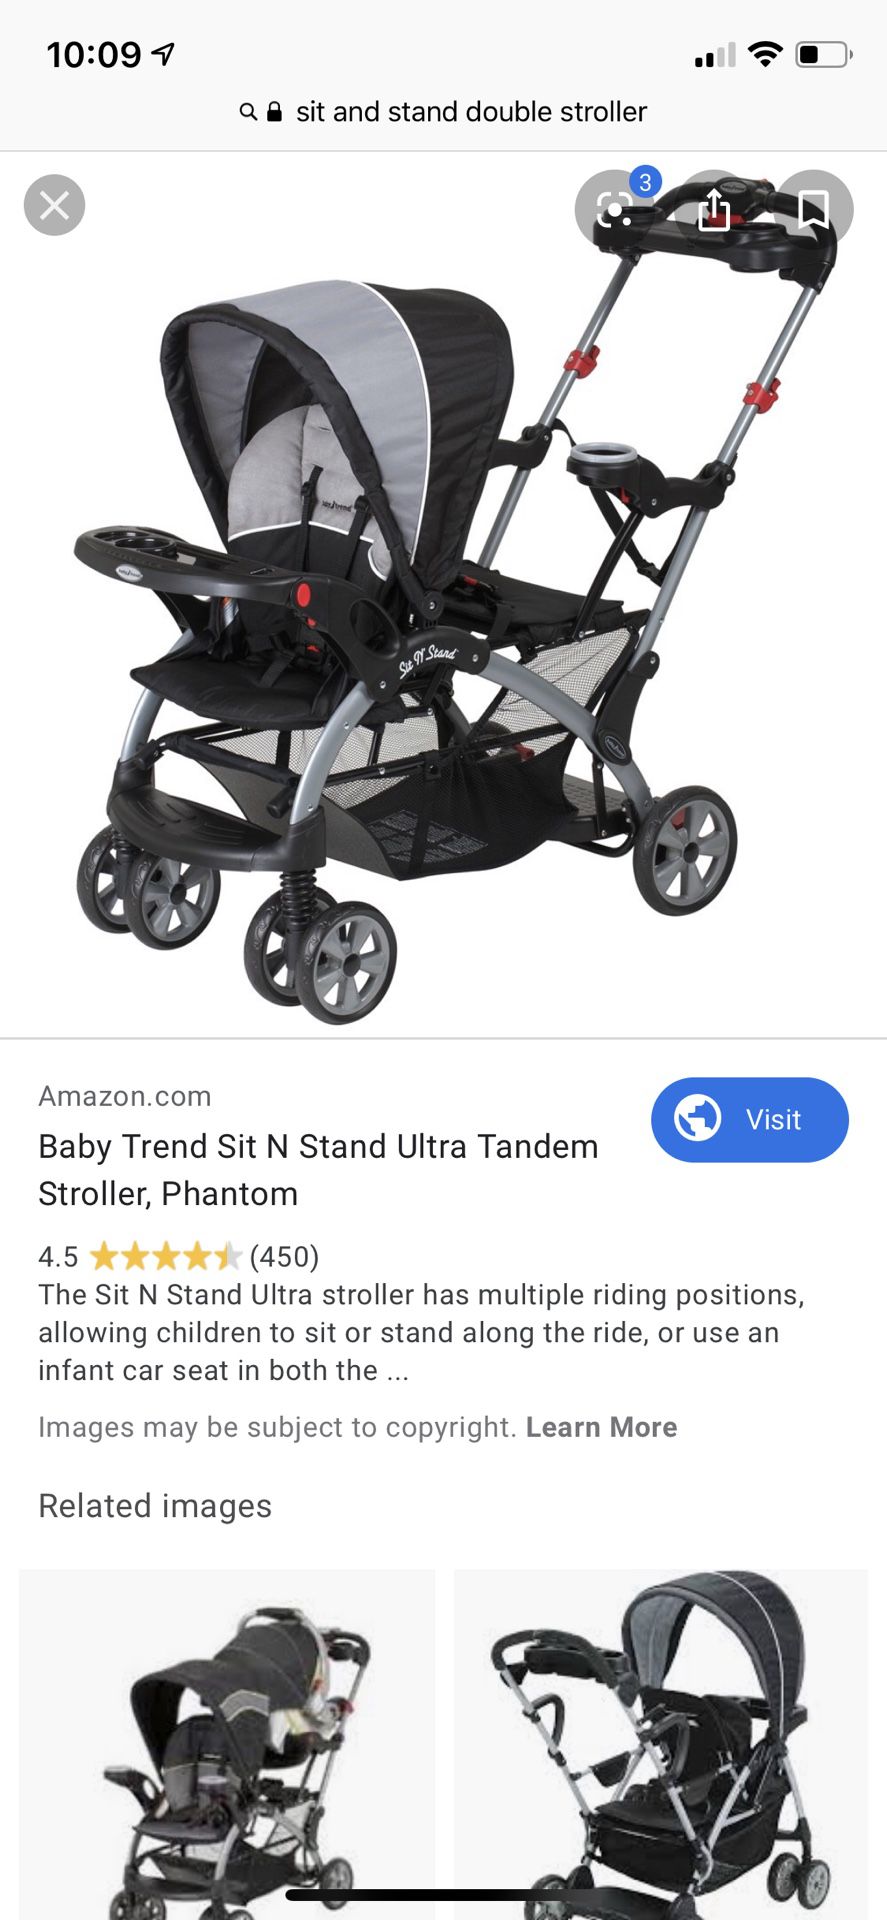 Sit and stand stroller